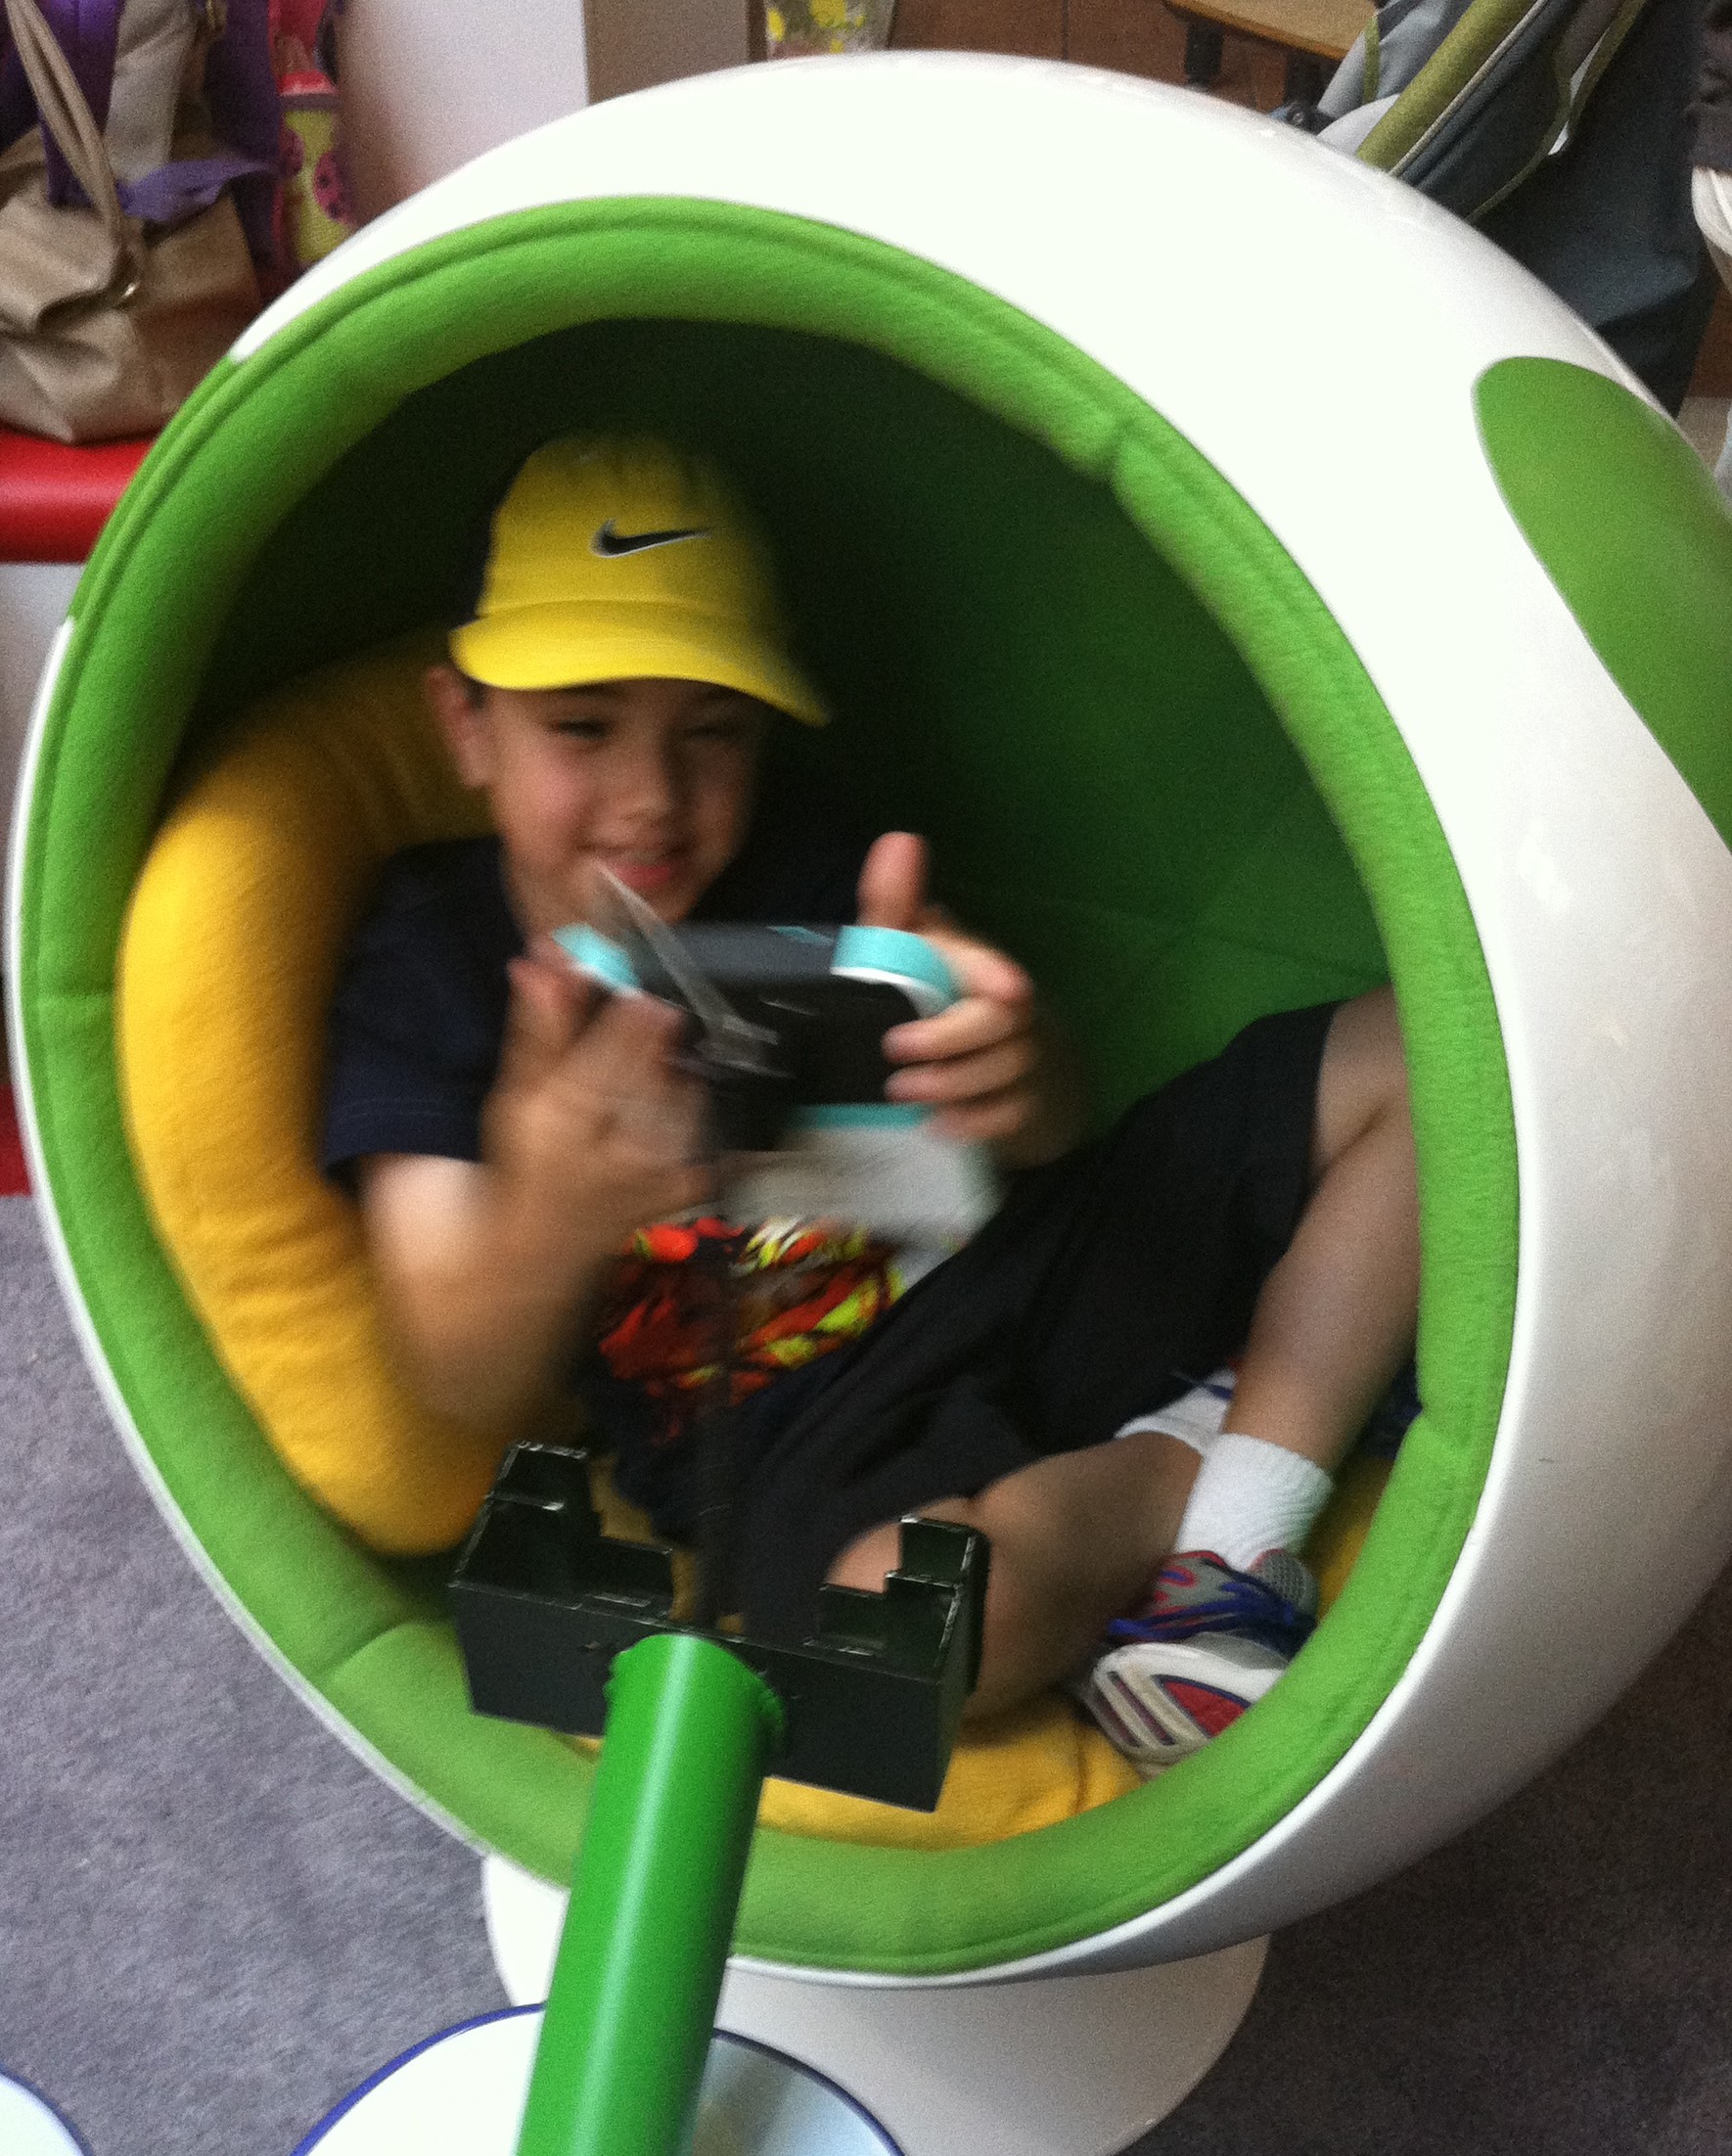 Super excited to sit in the Yoshi egg chair.